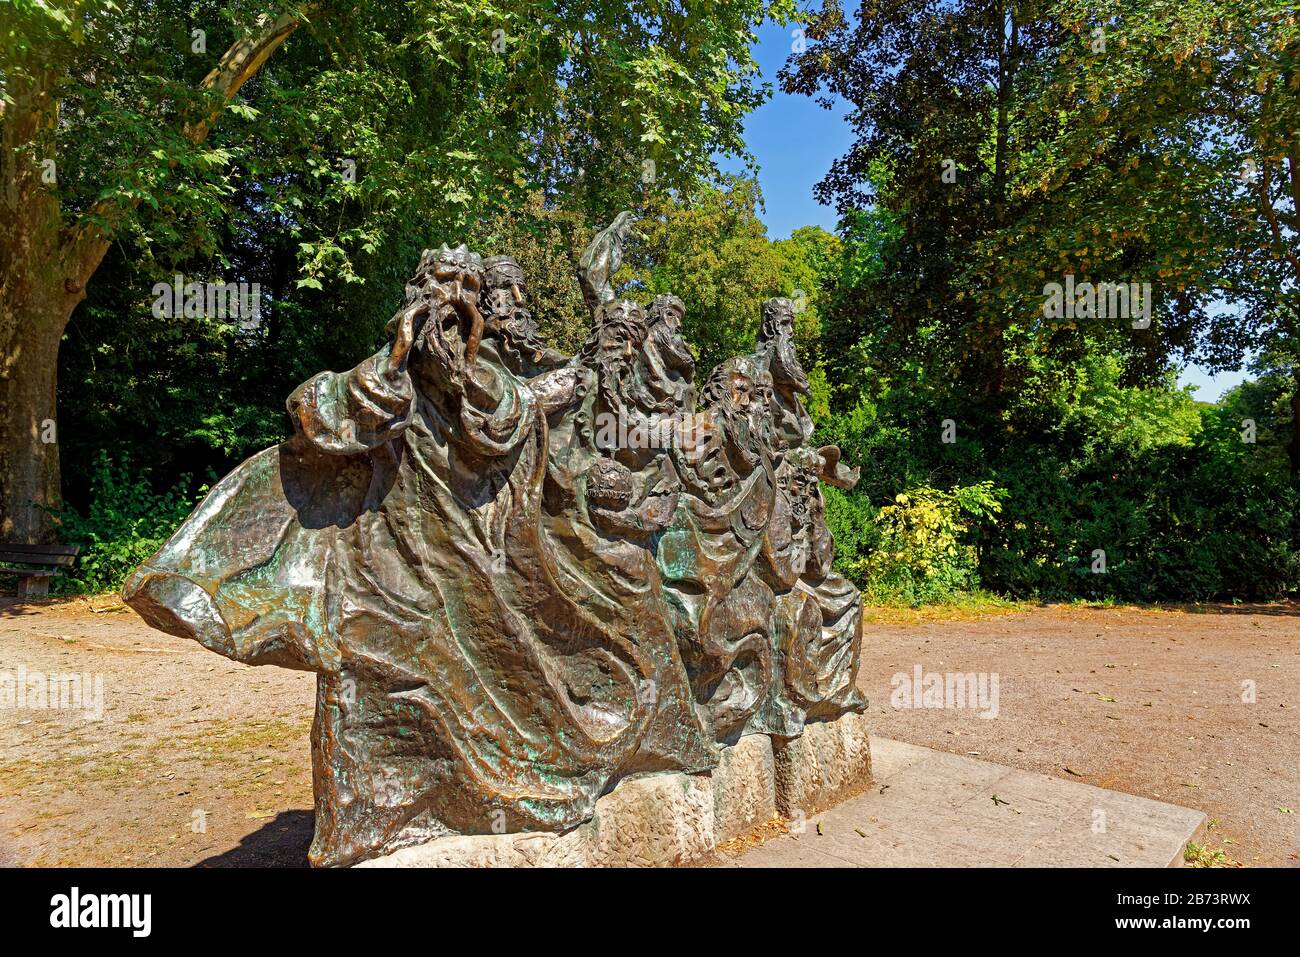 Germany, Rhineland-Palatinate, Speyer, cathedral place, SchUM town, cathedral garden, bronze figure, ferryman get, plants, trees, places, architecture Stock Photo